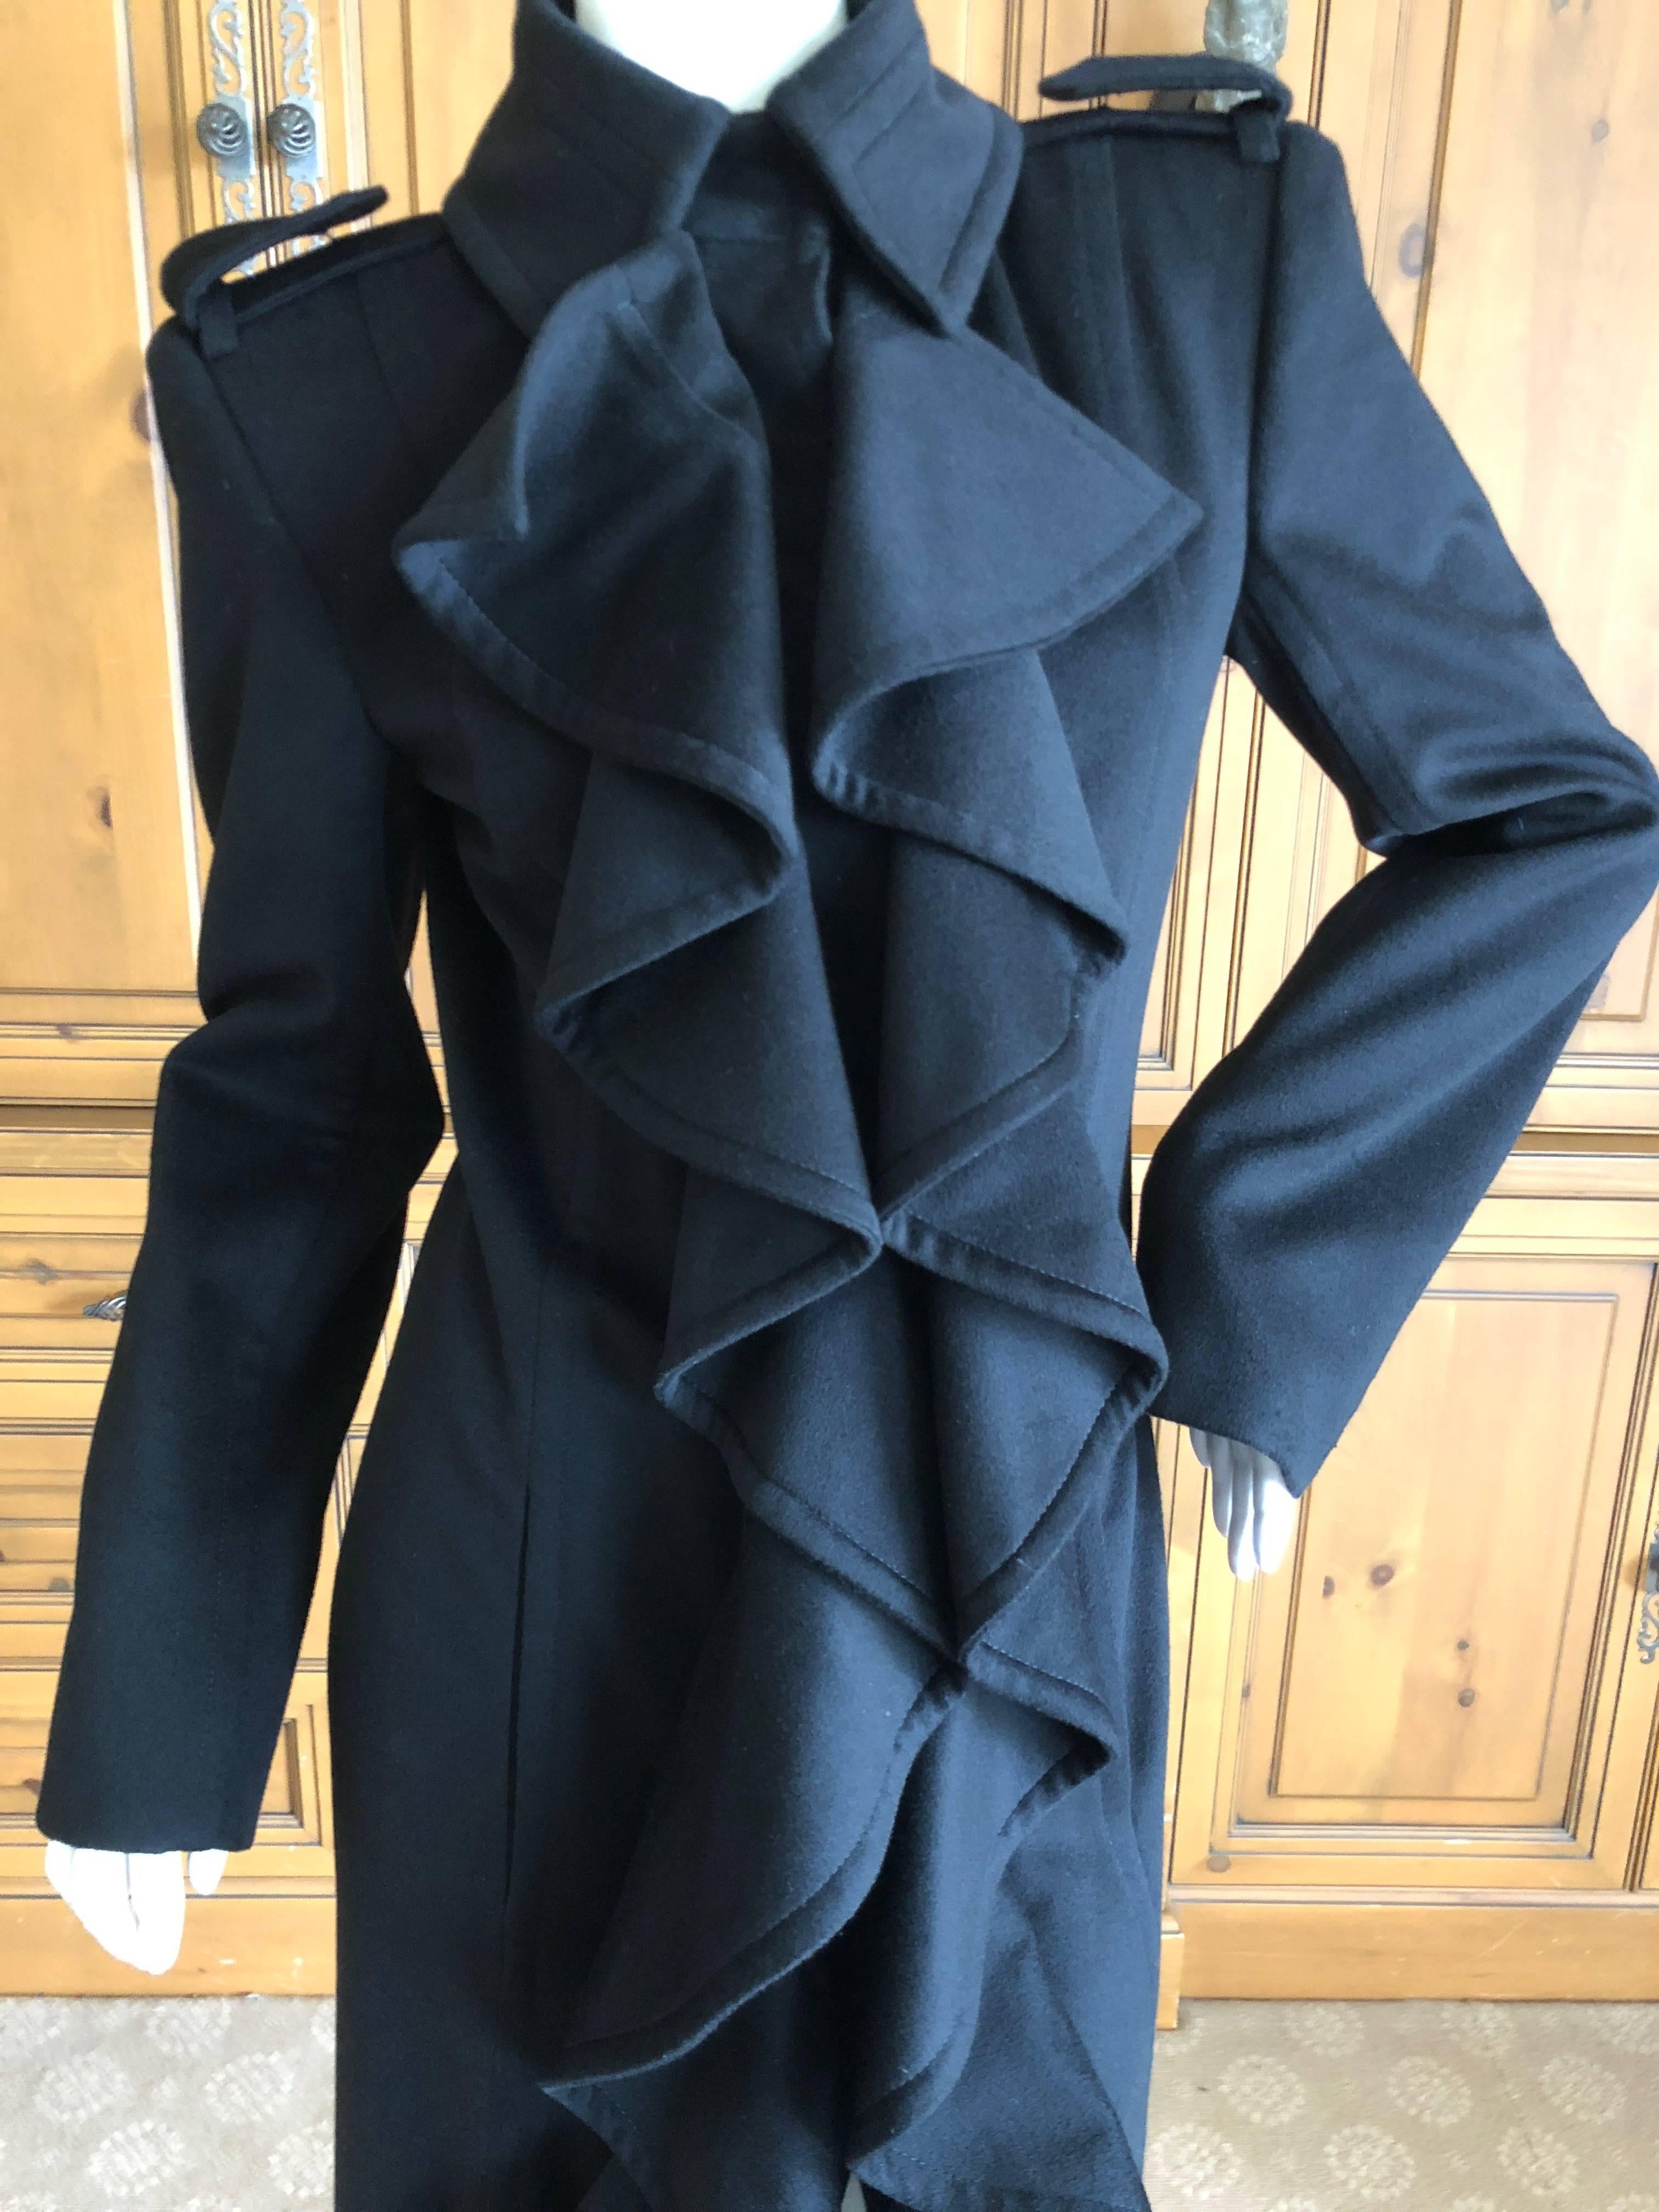 Women's Yves Saint Laurent by Tom Ford Black Wool Ruffle Front Coat from Fall 2004 For Sale